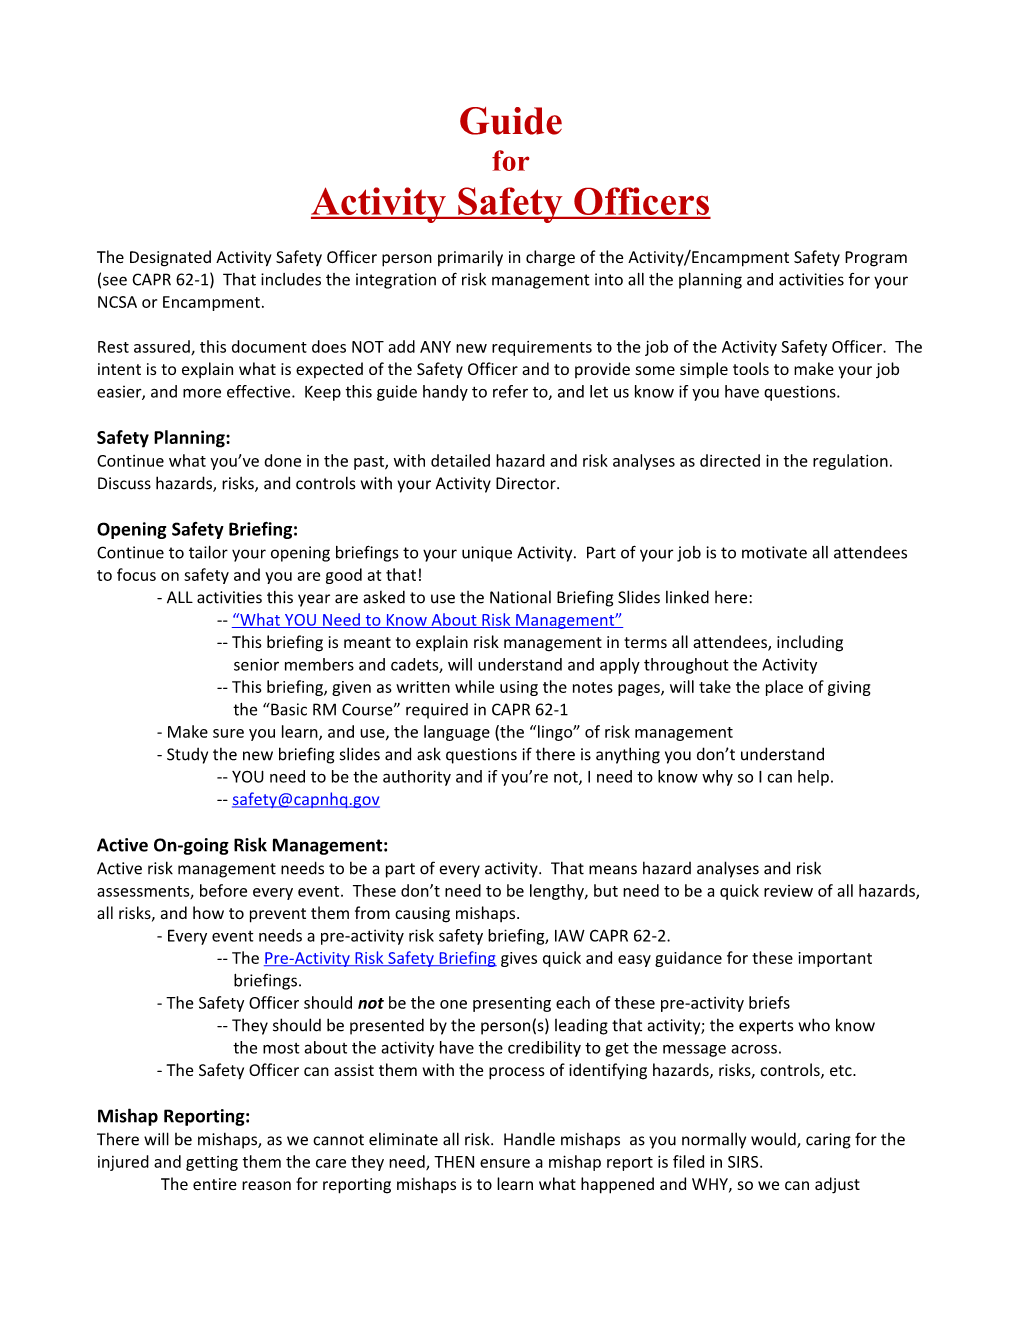 Activity Safety Officers